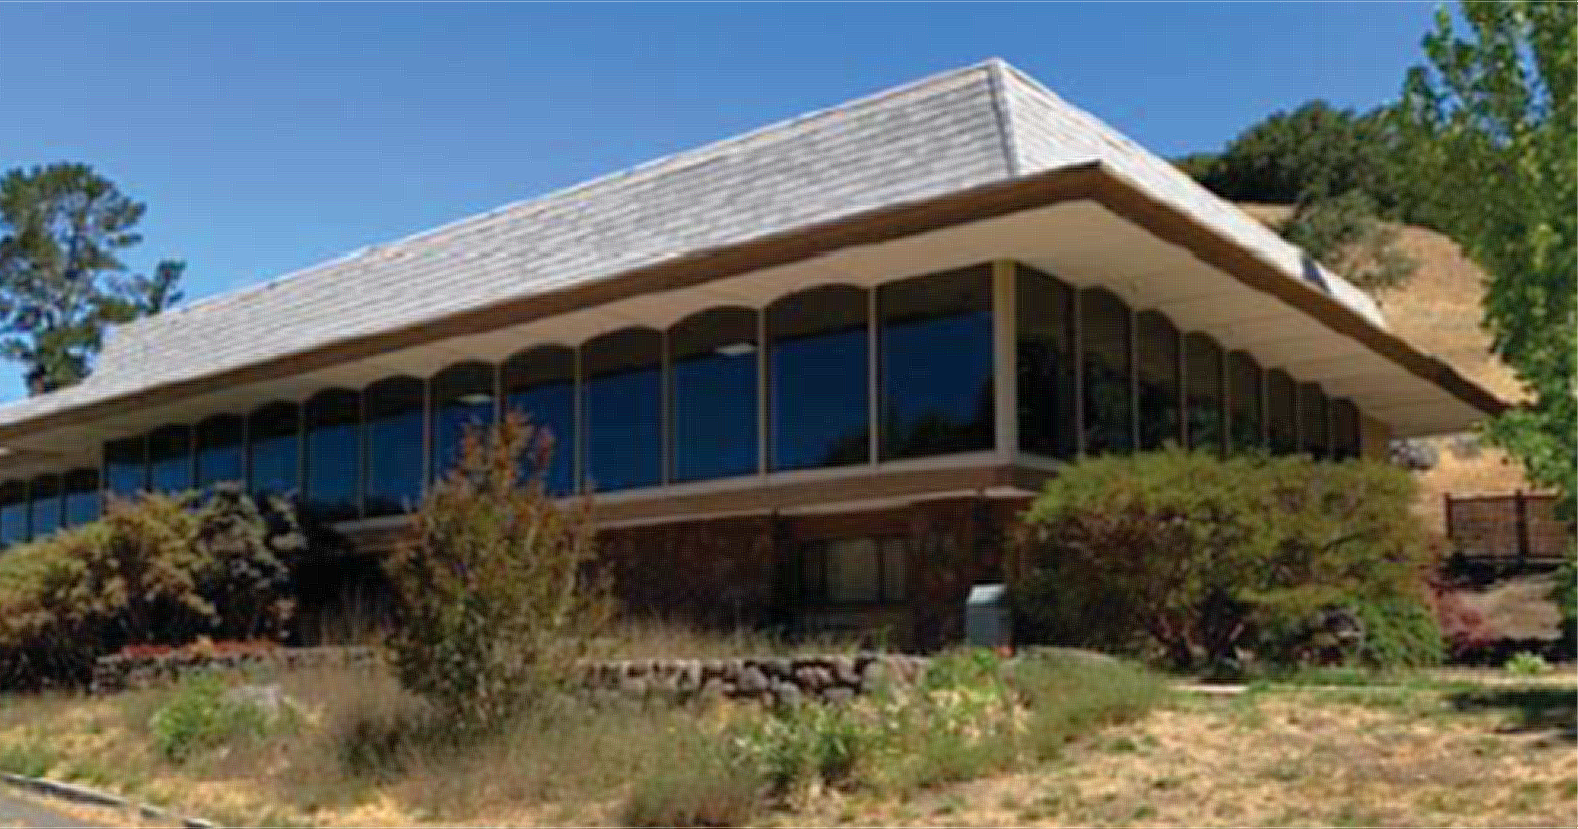 An exterior view of the clubhouse at the former San Geronimo Golf Course.